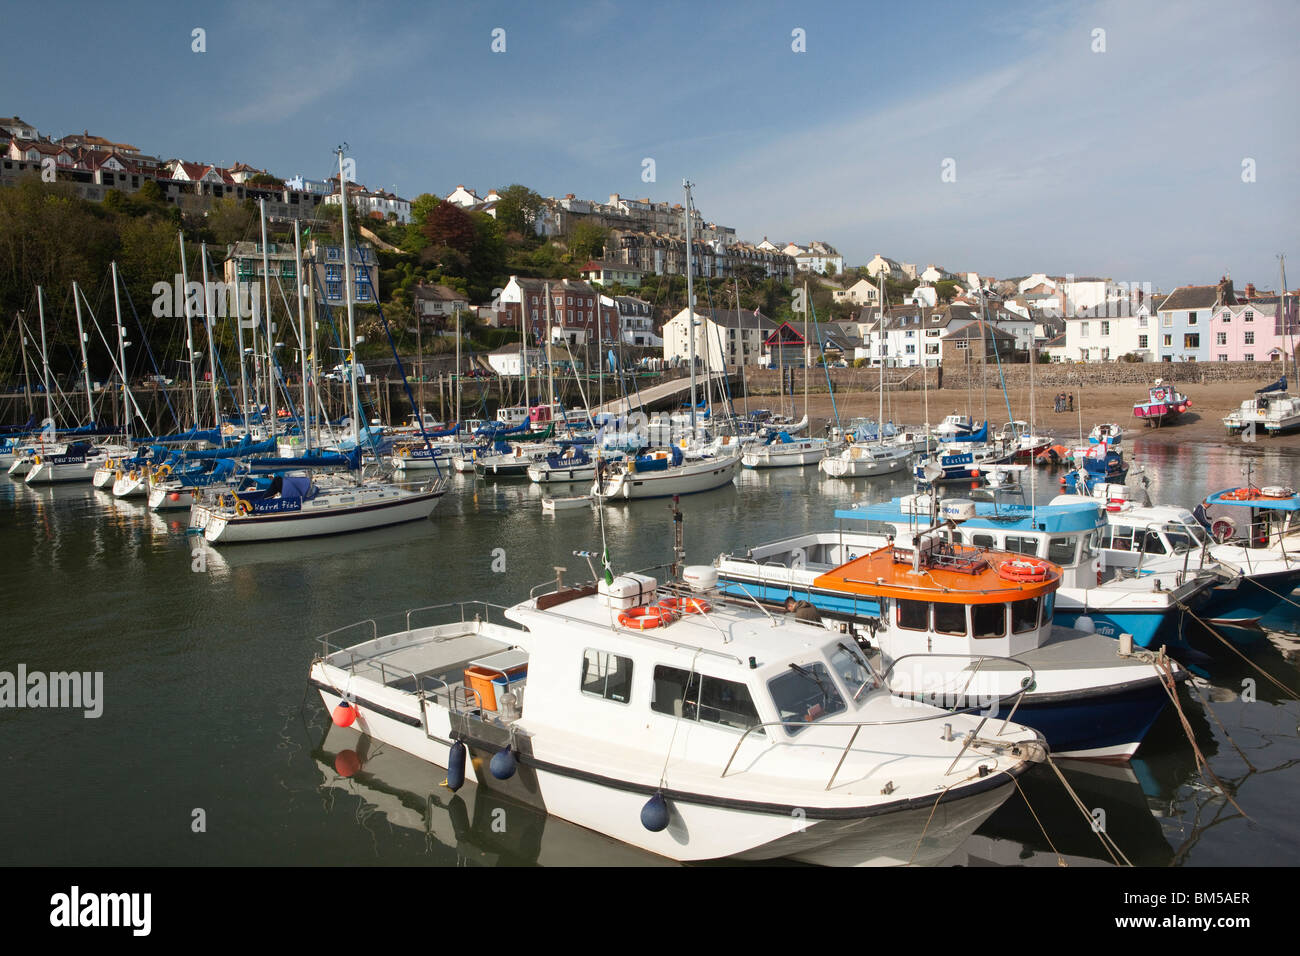 UK, England, Devon, Ilfracombe, leisure boats moored in the harbour Stock Photo